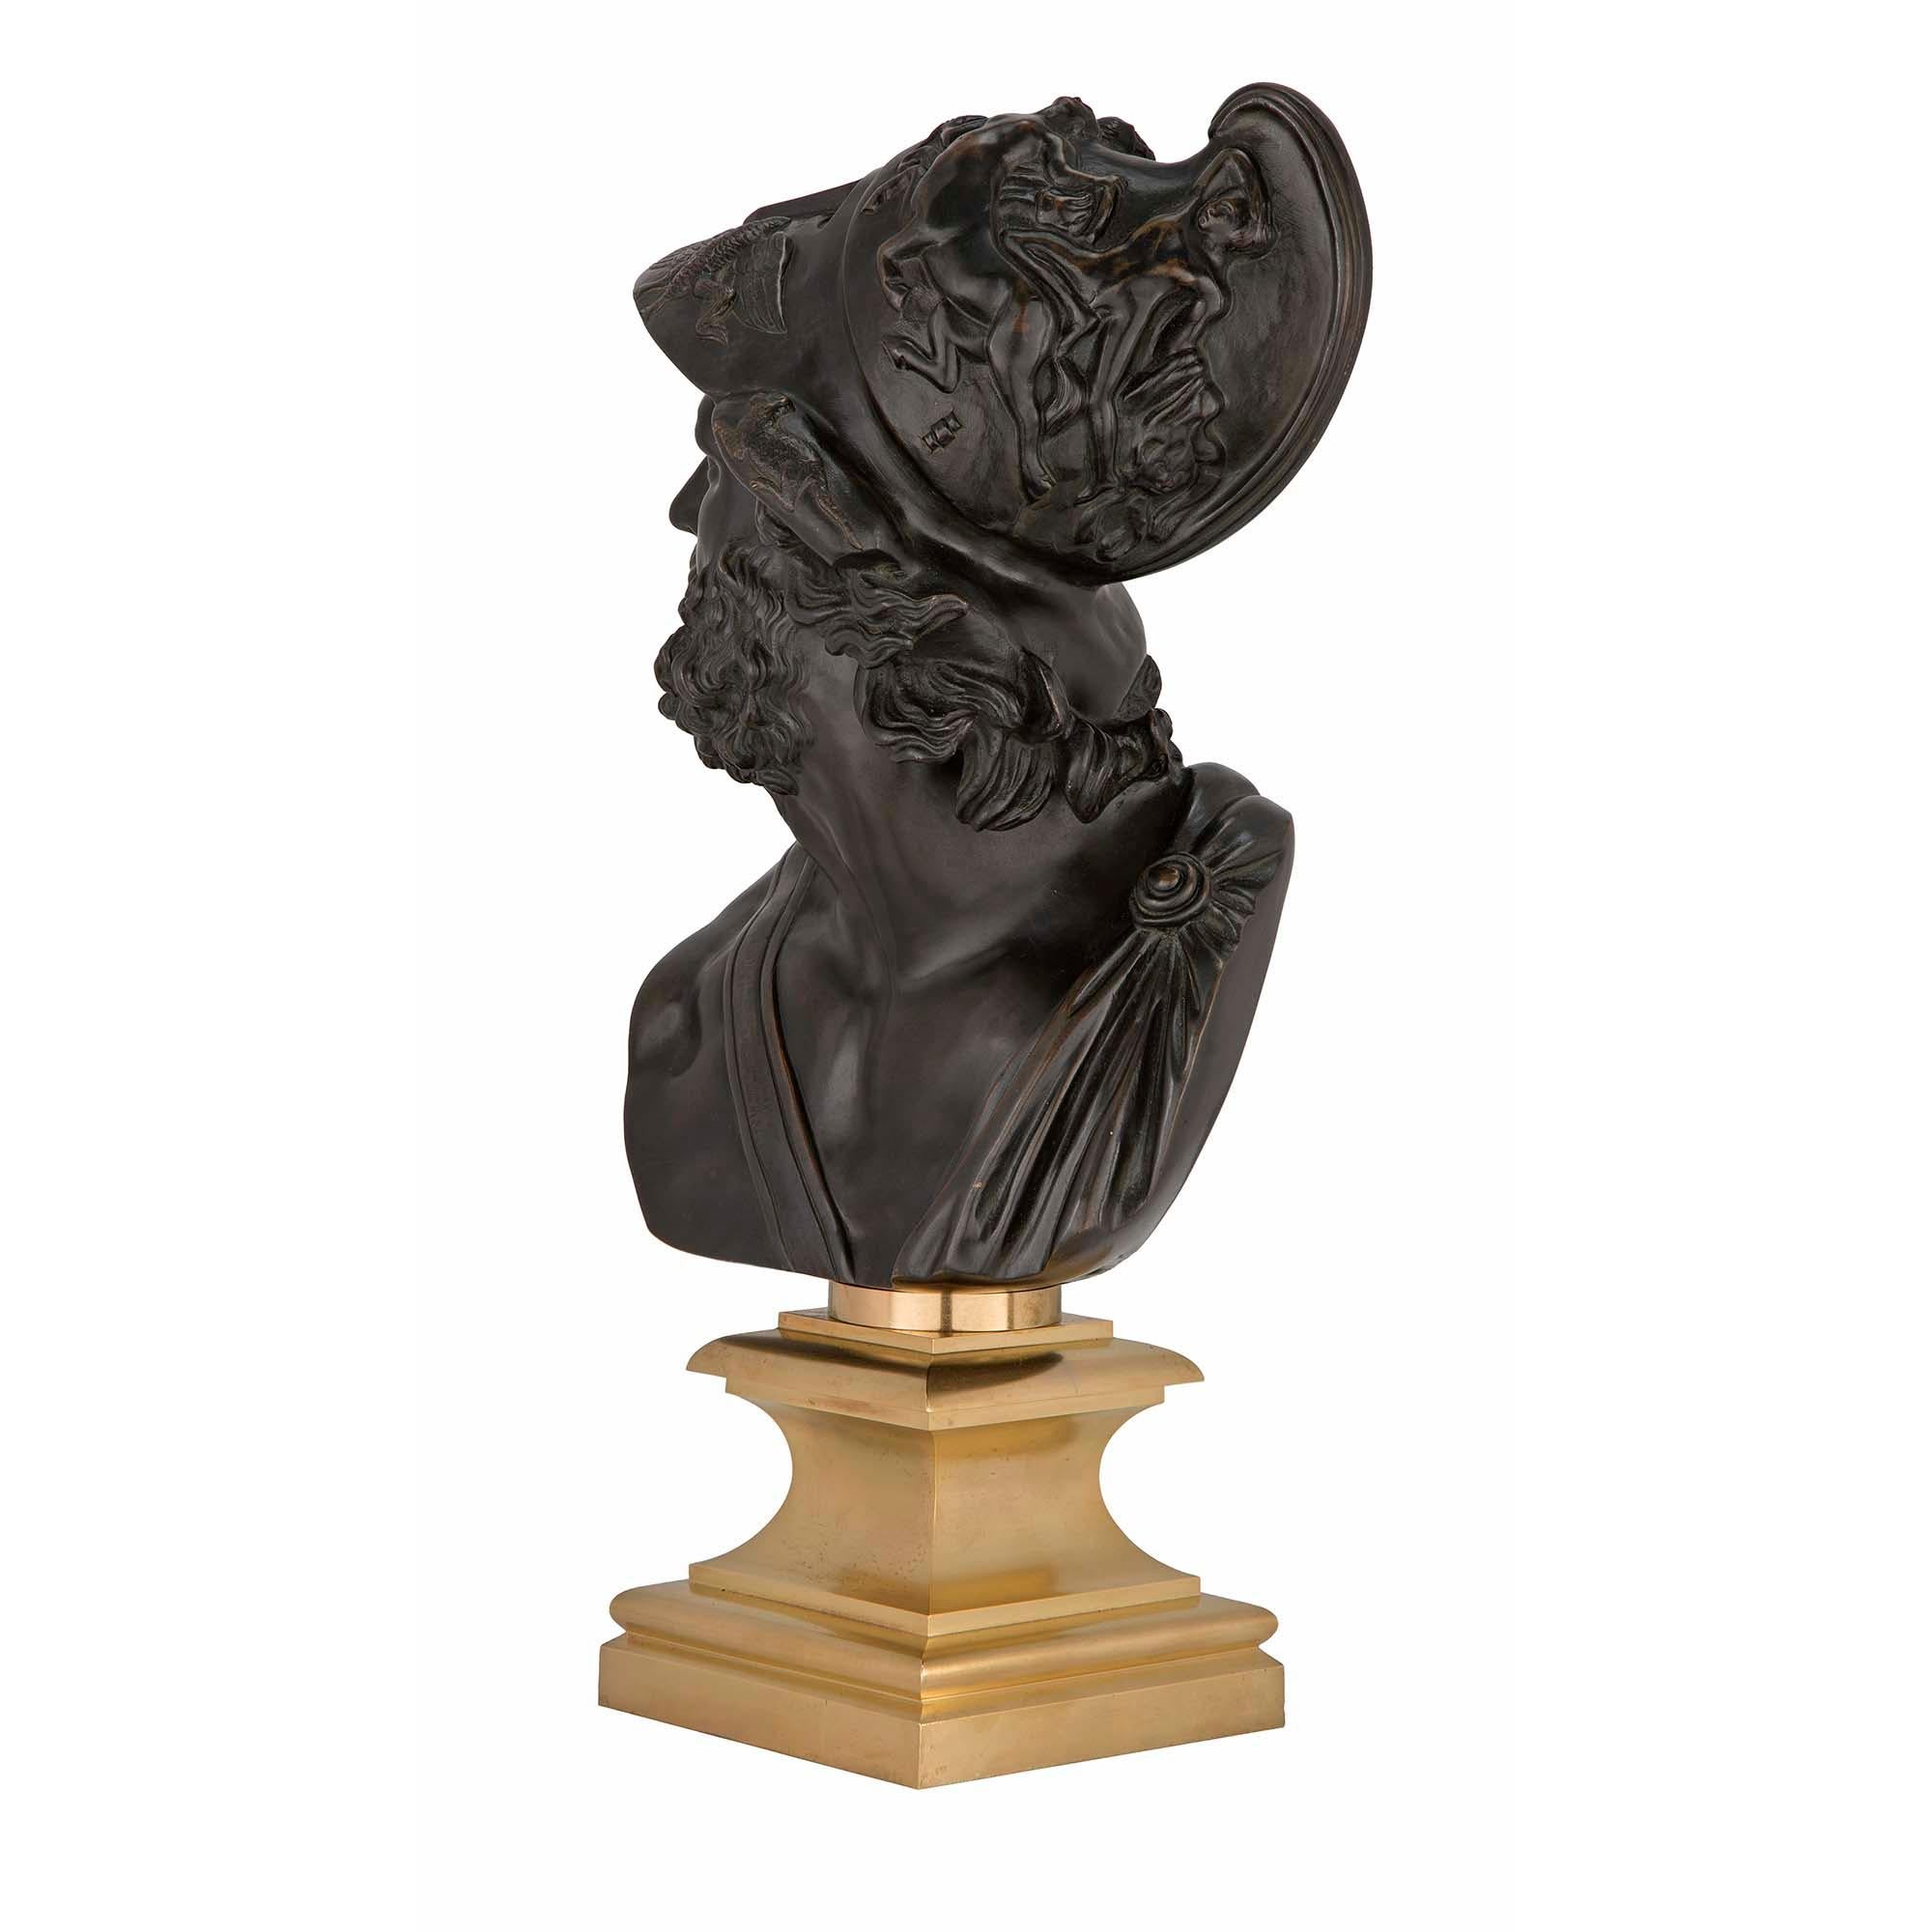 A striking French 19th century Louis XVI style patinated bronze and ormolu bust of Menelaus. The bust is raised by a square ormolu base below a fine mottled socle pedestal. The richly chased patinated bronze soldier is draped in period attire tied